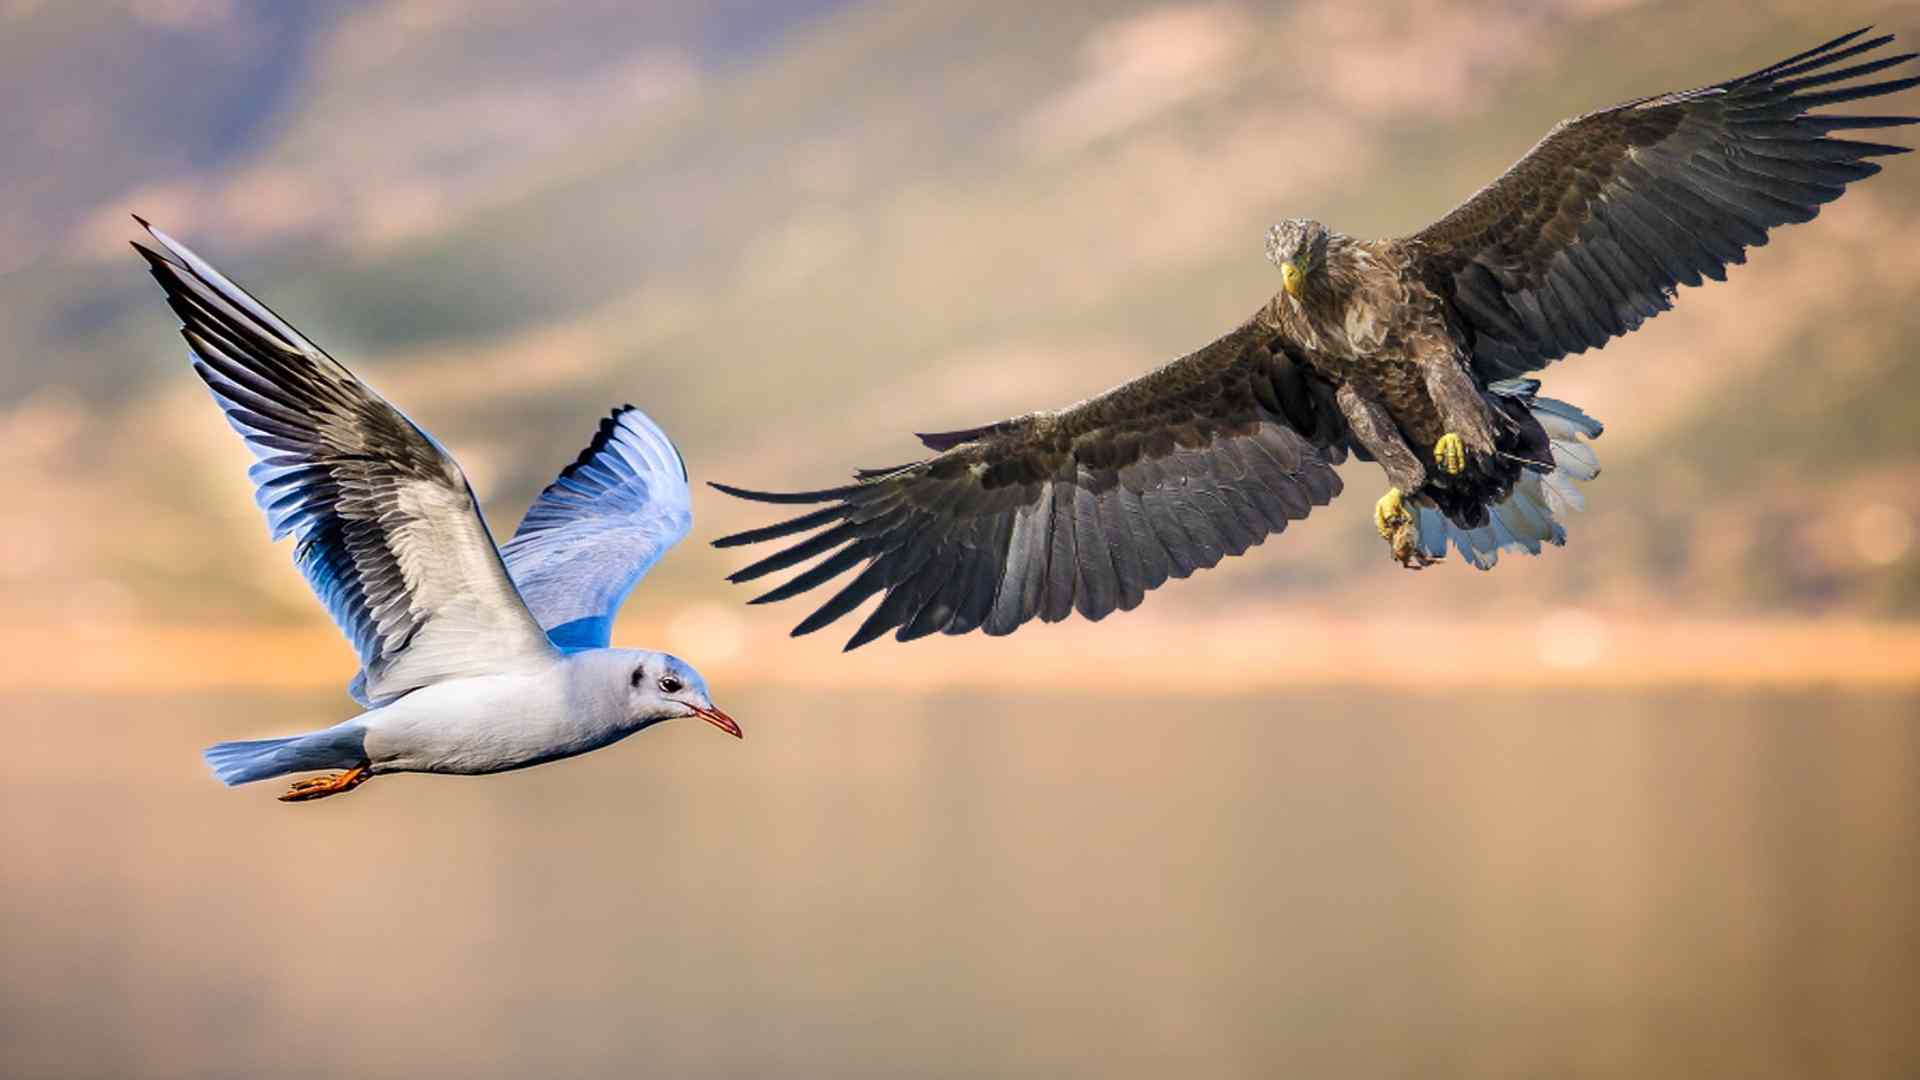 Are seagulls related to eagles